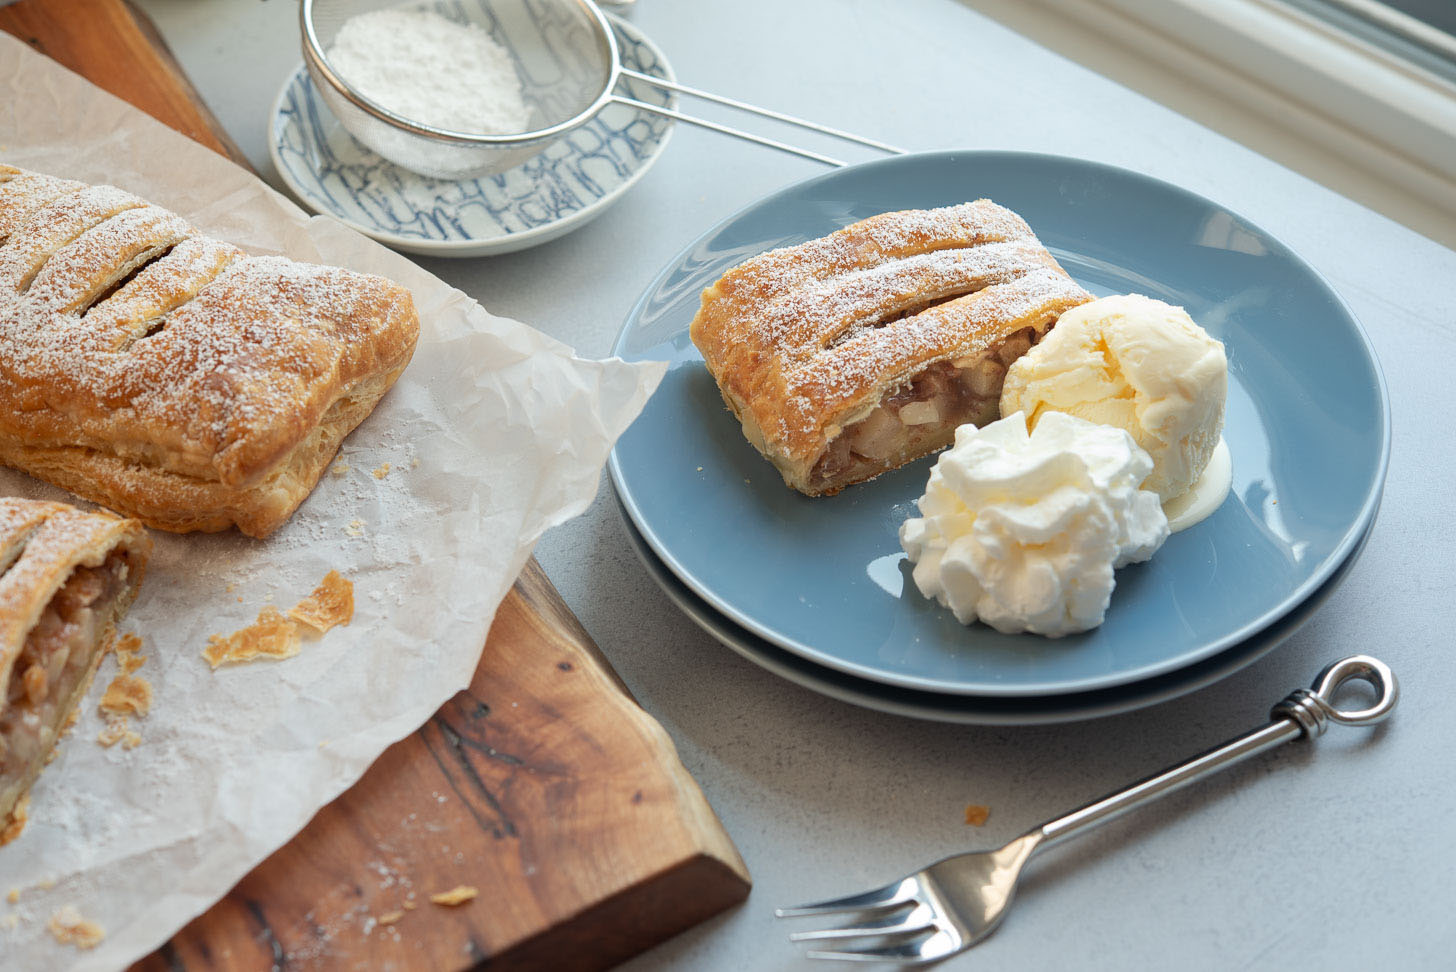 A slice of apple strudel with ice cream and whipped cream on a plate.